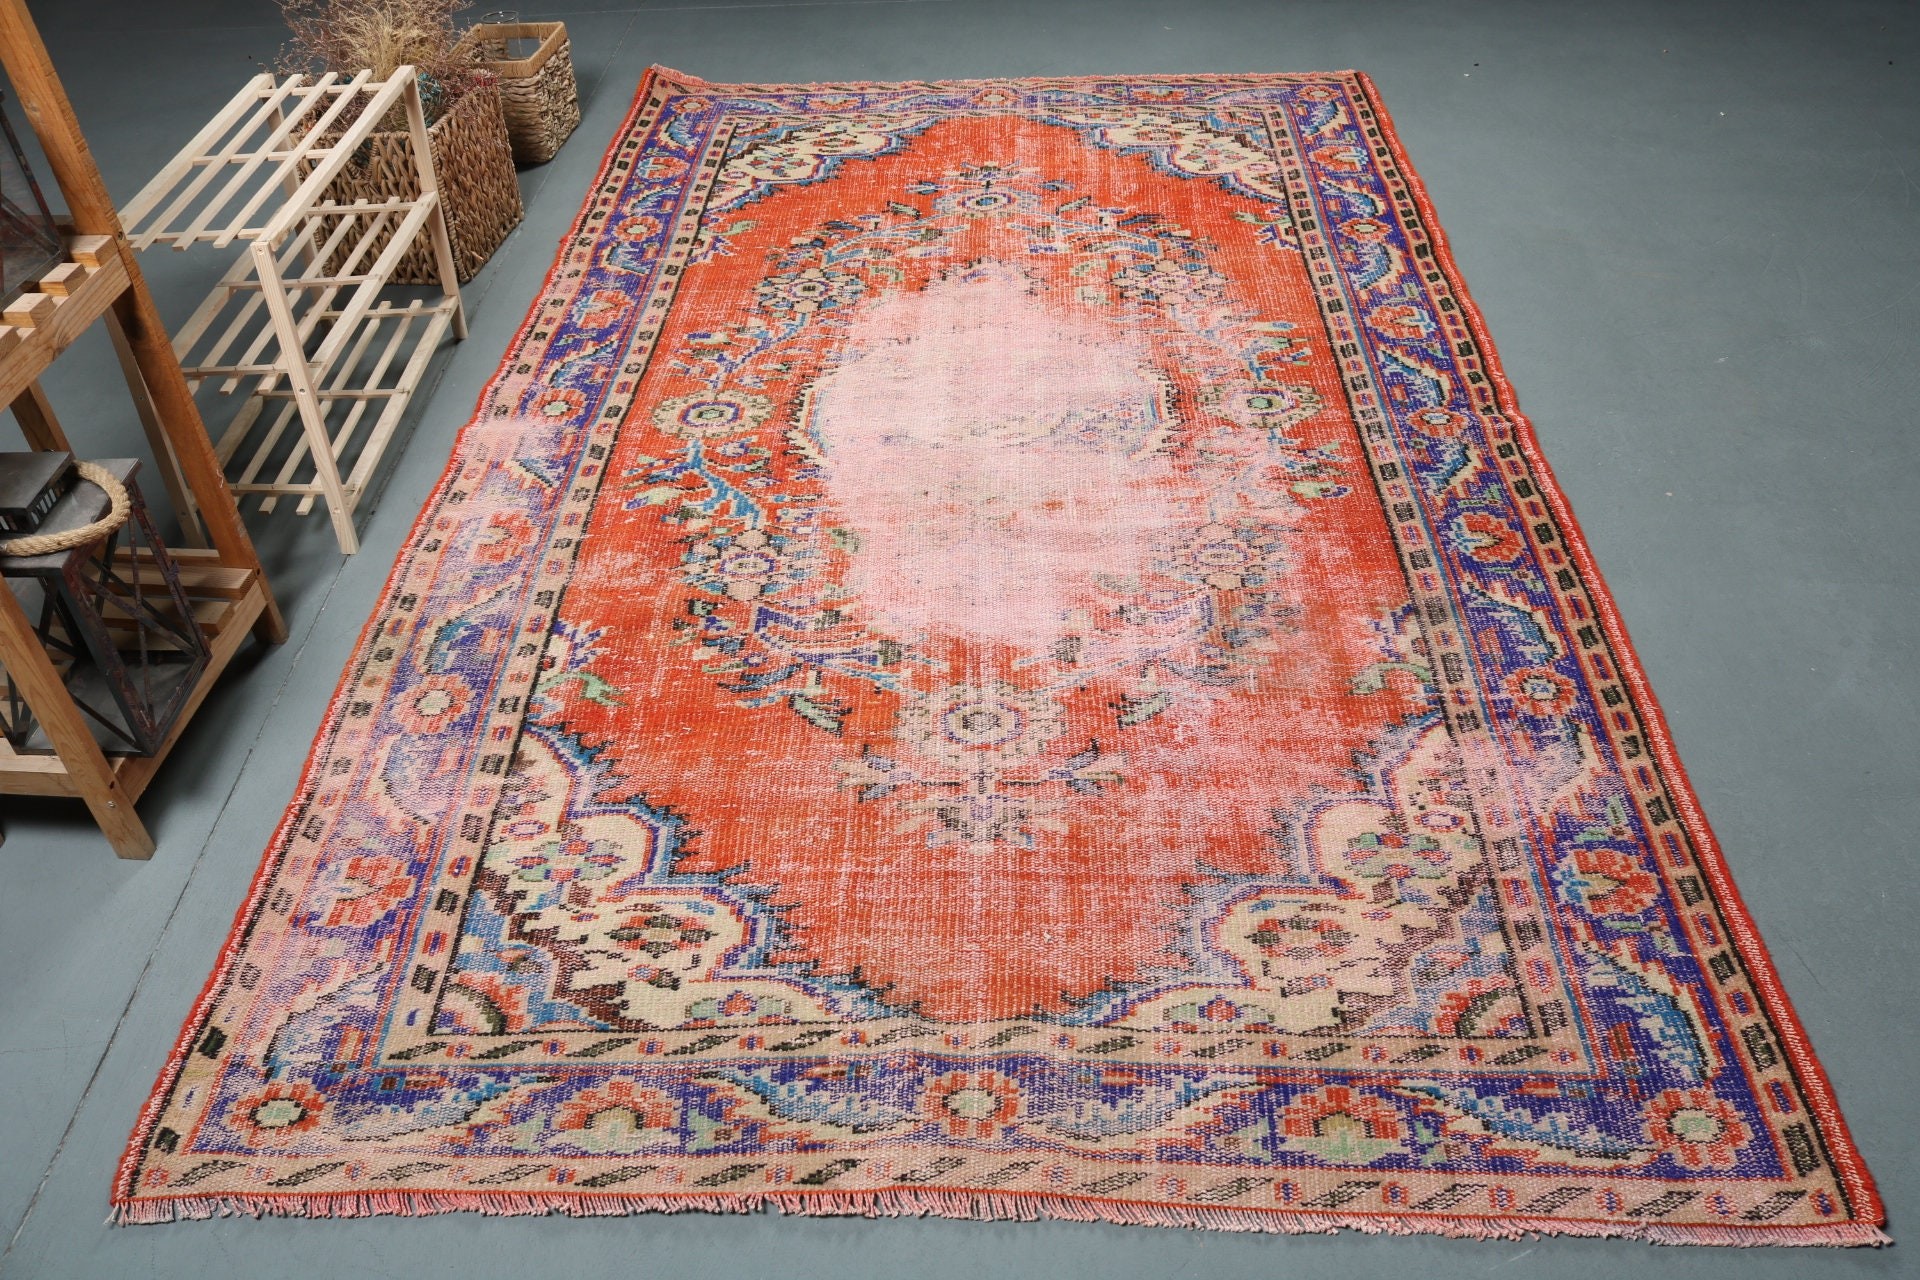 Wool Rug, Vintage Rug, 5.5x5.9 ft Area Rugs, Decorative Rug, Living Room Rug, Turkish Rugs, Rugs for Dining Room, Kitchen Rugs, Antique Rug